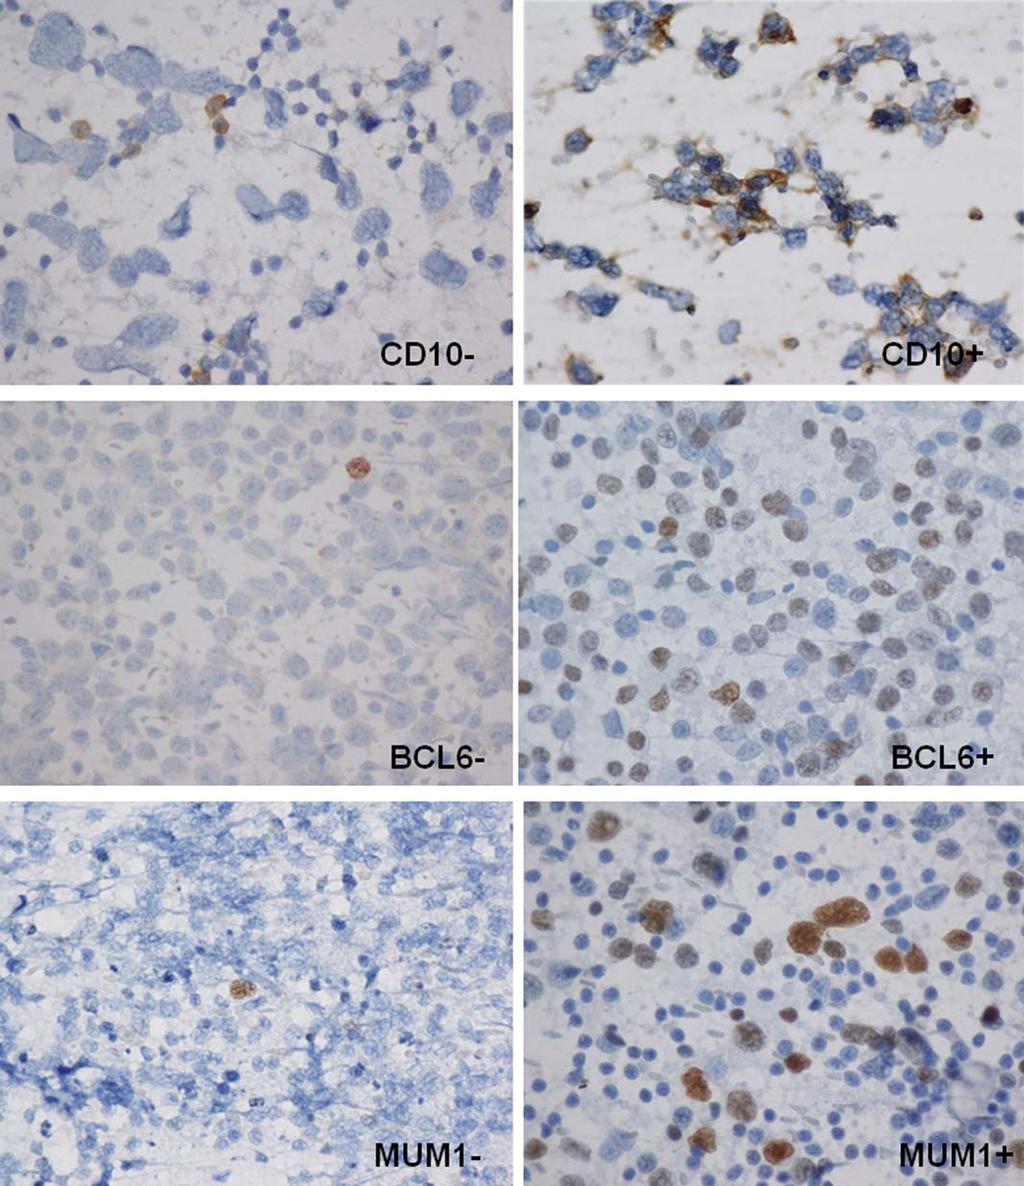 CD10, BCL6, and MUM1 in DLBCL/Cozzolino et al Figure 3. Immunostaining with CD10, B-cell lymphoma 6 (BCL6), and multiple myeloma oncogene 1 (MUM1) in diffuse large B-cell lymphoma conventional smears.